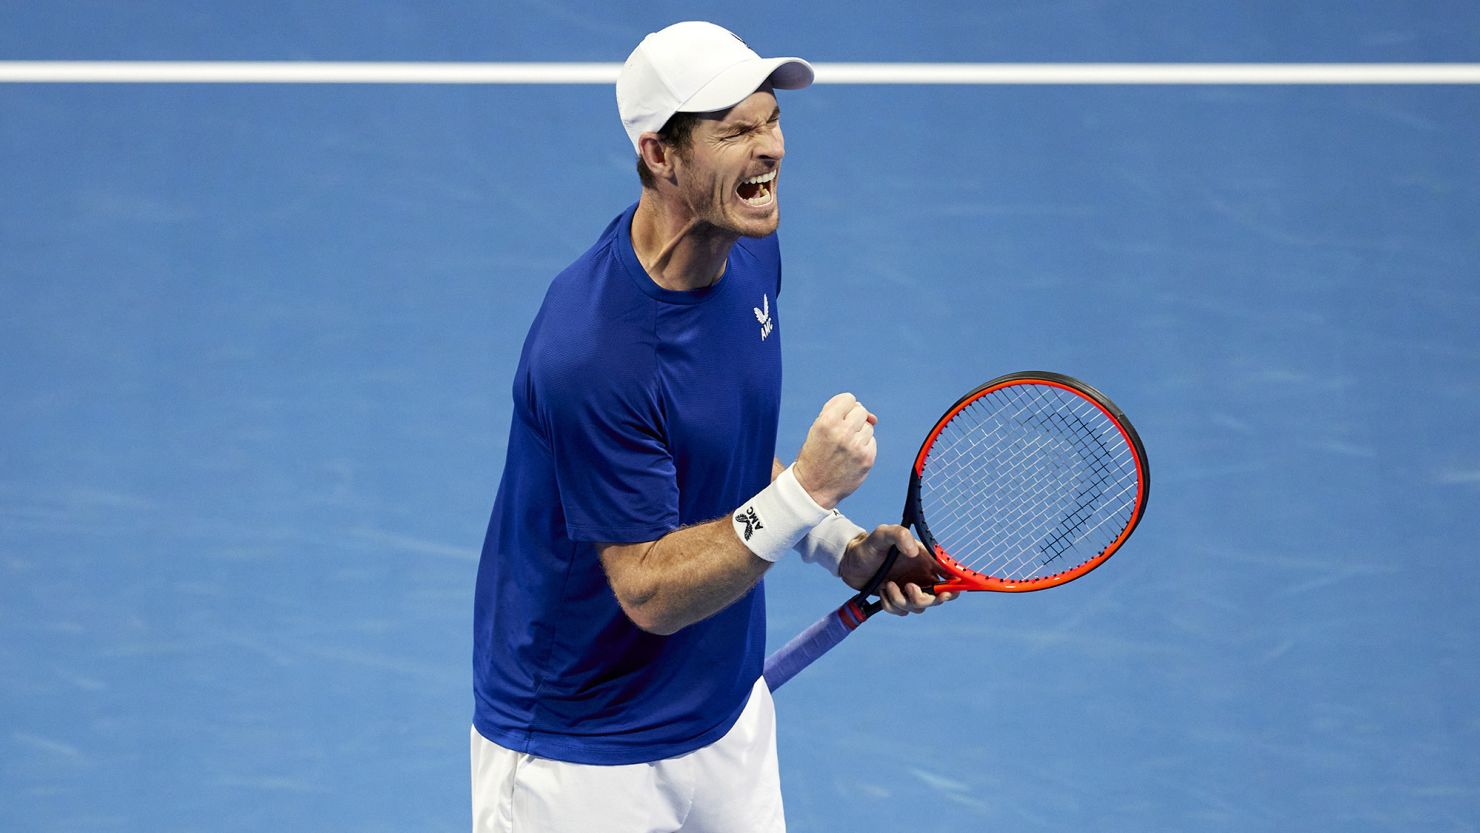 Andy Murray celebrates after winning match point against Alexandre Muller of France in their first round match during the Qatar Open.